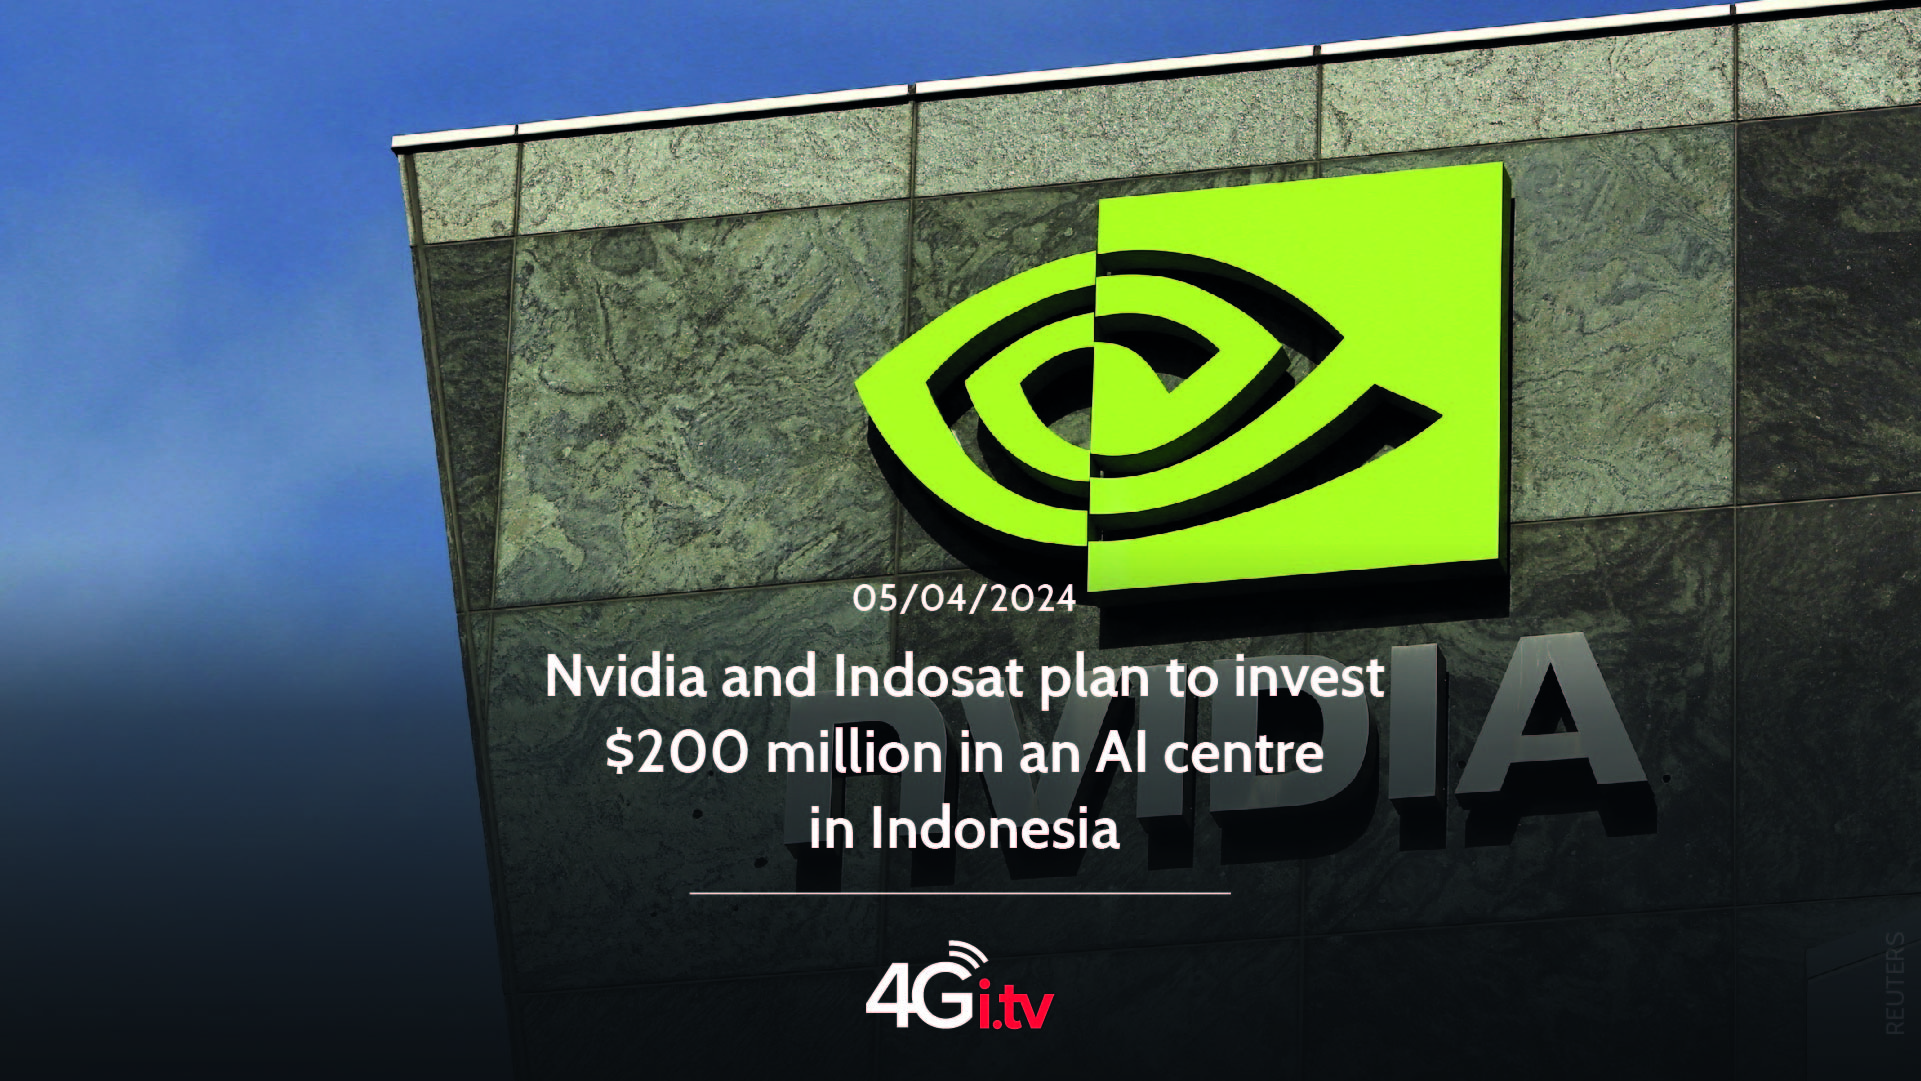 Подробнее о статье Nvidia and Indosat plan to invest $200 million in an AI centre in Indonesia